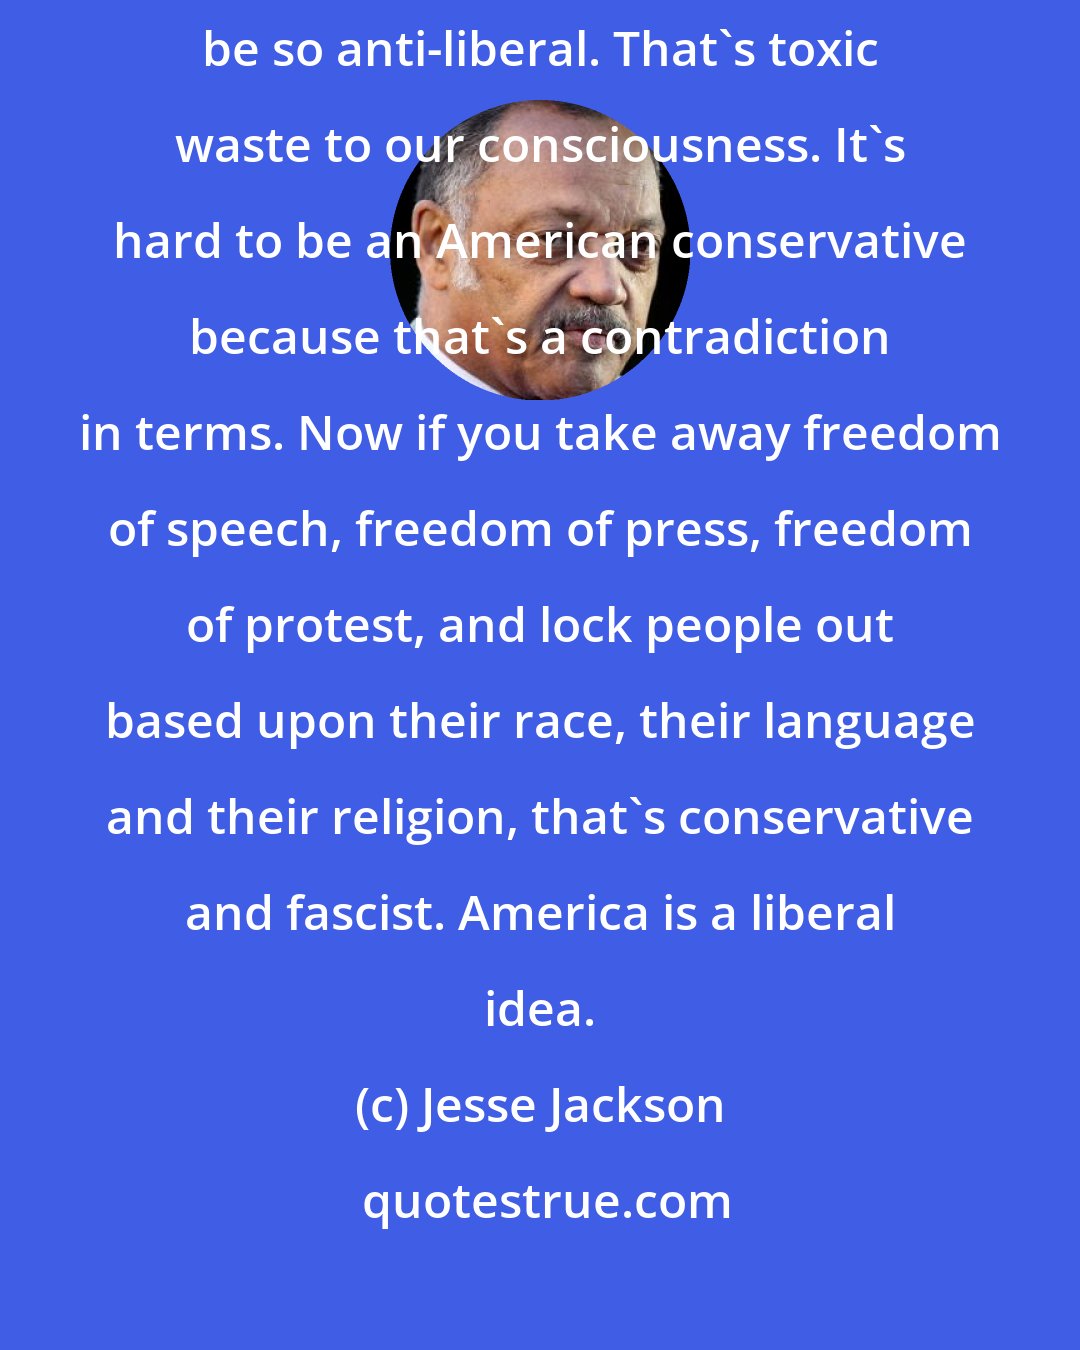 Jesse Jackson: How can you have in our country that is based upon liberality and liberation, be so anti-liberal. That's toxic waste to our consciousness. It's hard to be an American conservative because that's a contradiction in terms. Now if you take away freedom of speech, freedom of press, freedom of protest, and lock people out based upon their race, their language and their religion, that's conservative and fascist. America is a liberal idea.